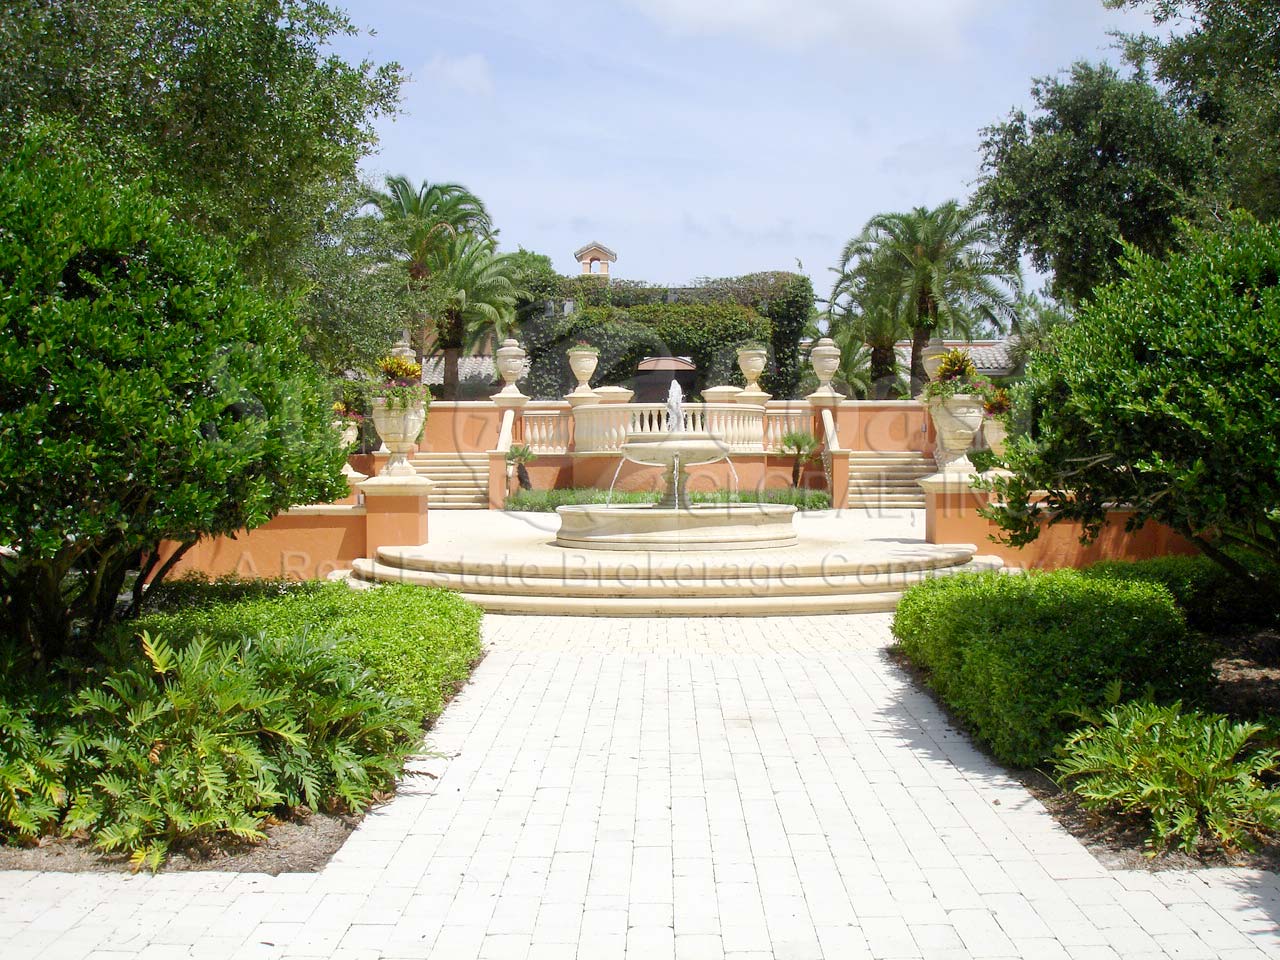 MEDITERRA fountain between the clubhouse and the golf club